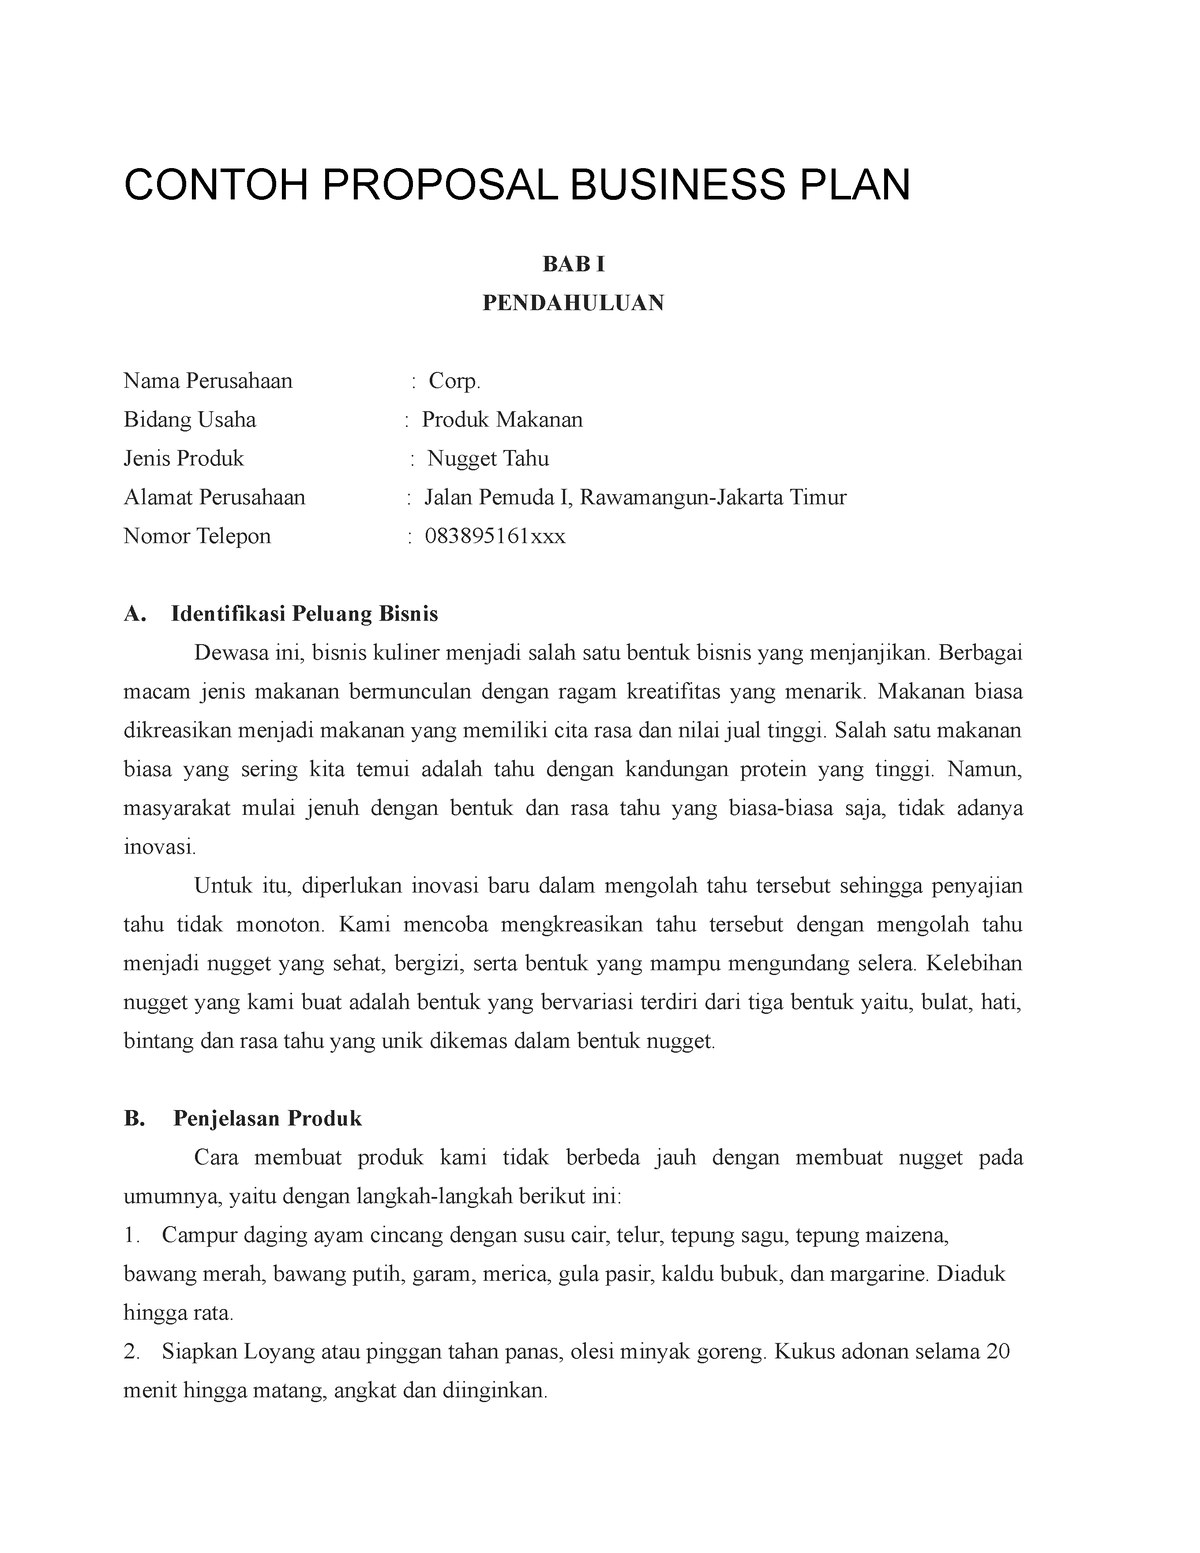 contoh business plan homestay